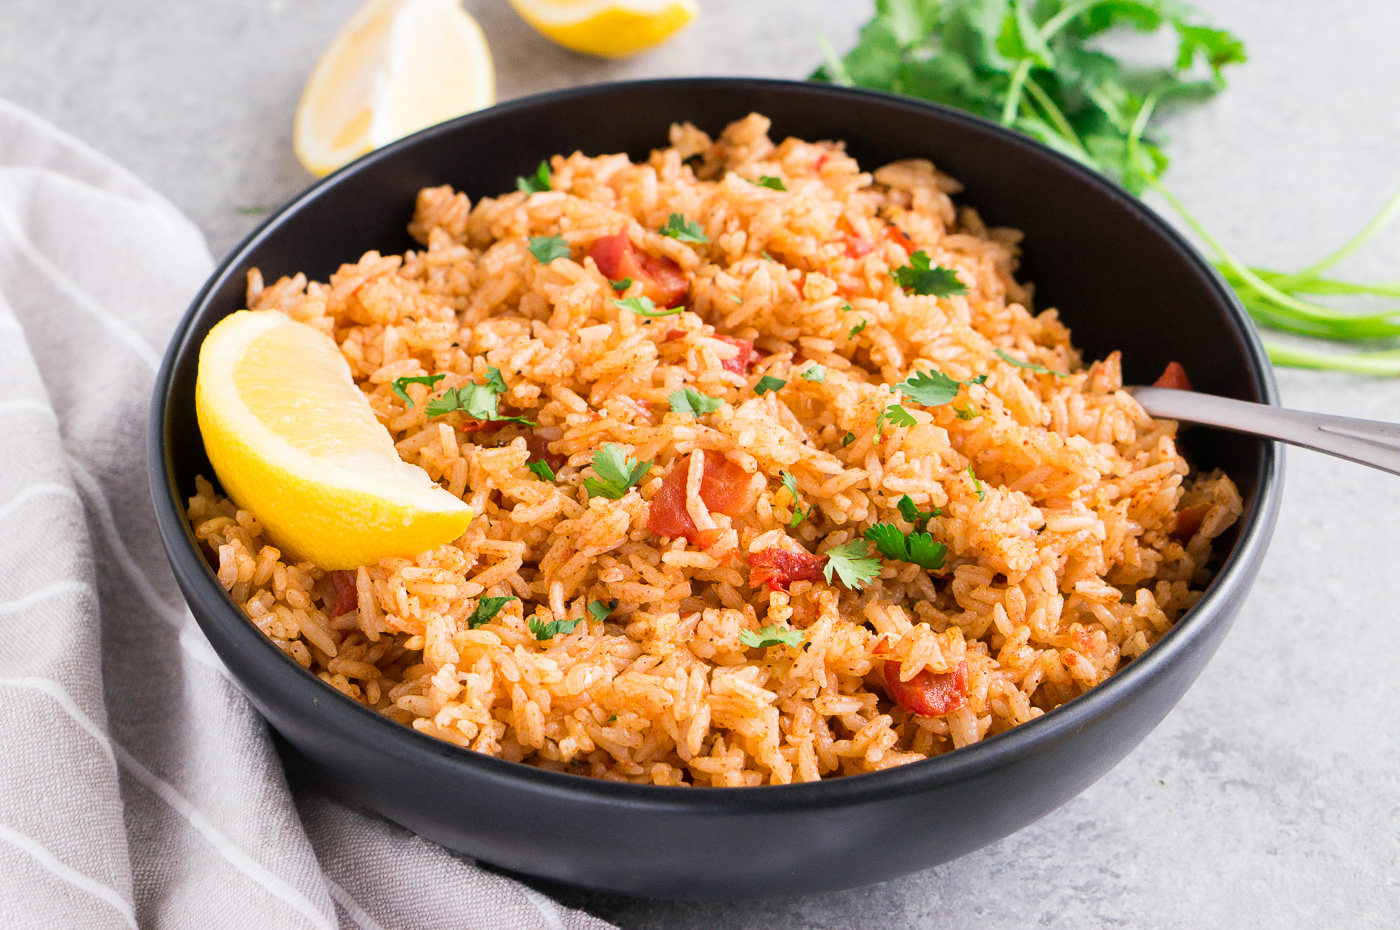 spanish rice in a black bowl with lemon wedge